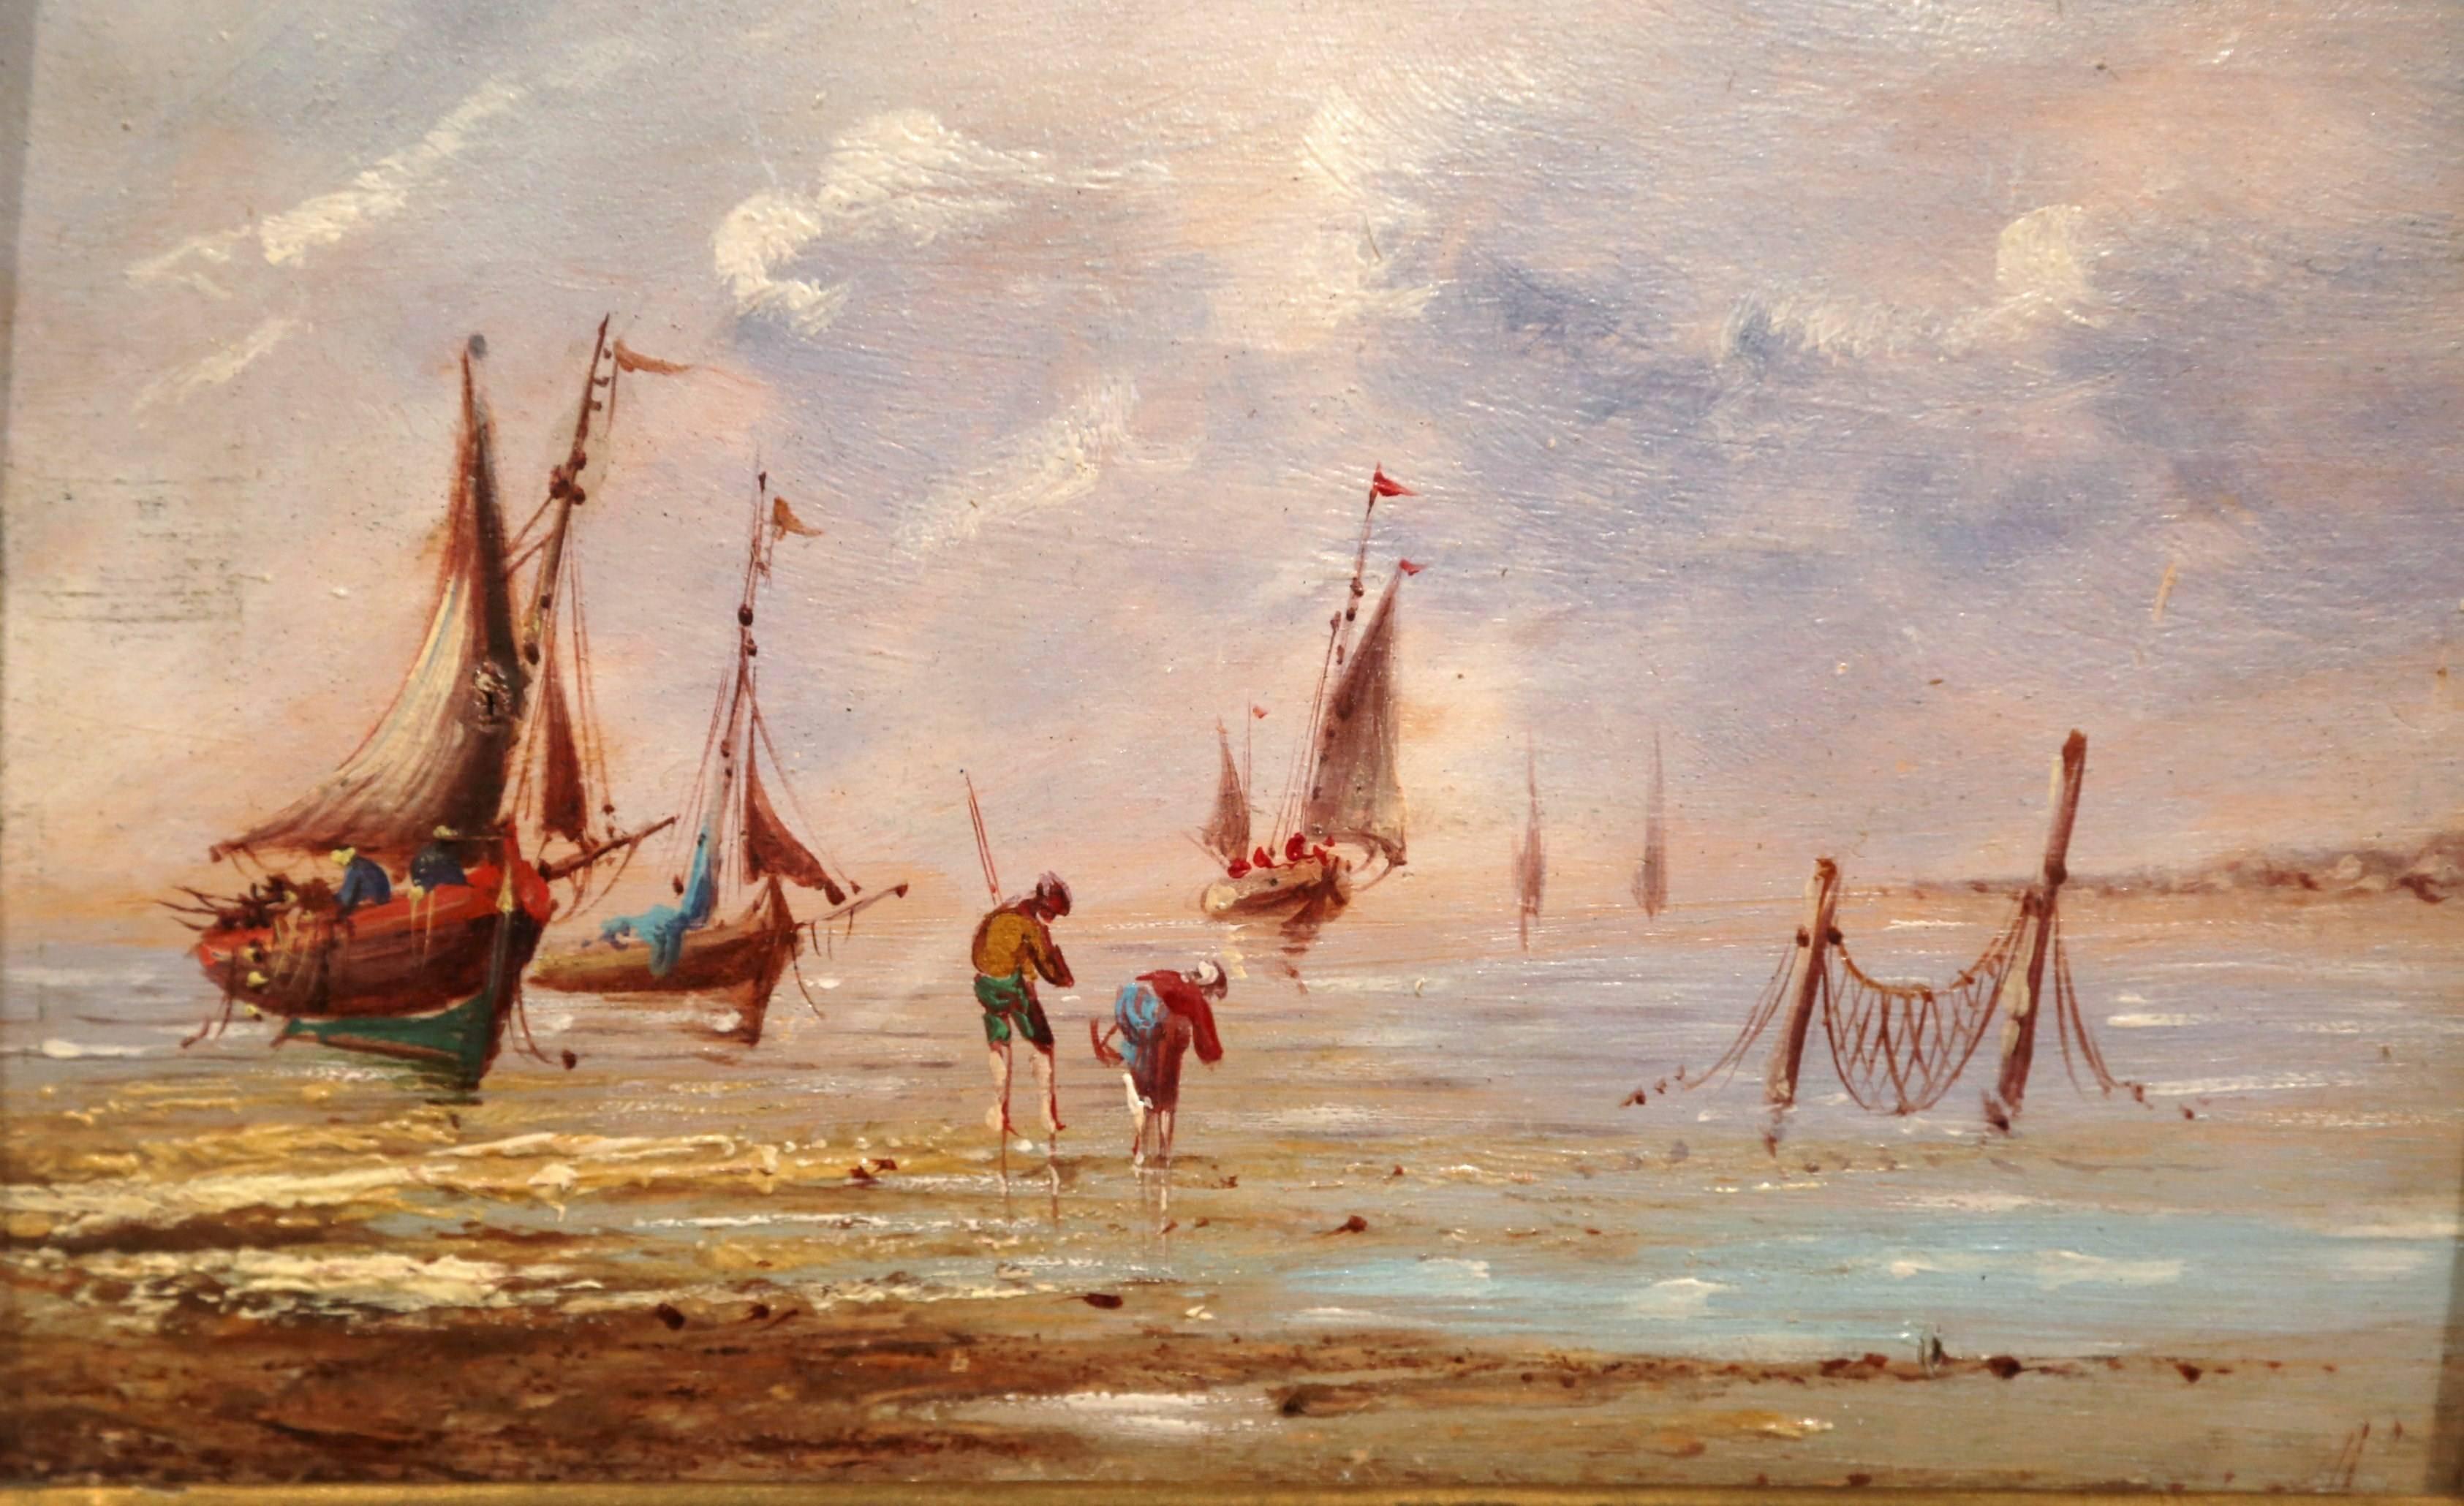 This small oil painting with original gilt frame was created in France, circa 1860; it features a typical fishing scene on the Brittany coast, with two people picking shellfish with sailboats in the background. Very detailed work and wonderful rich